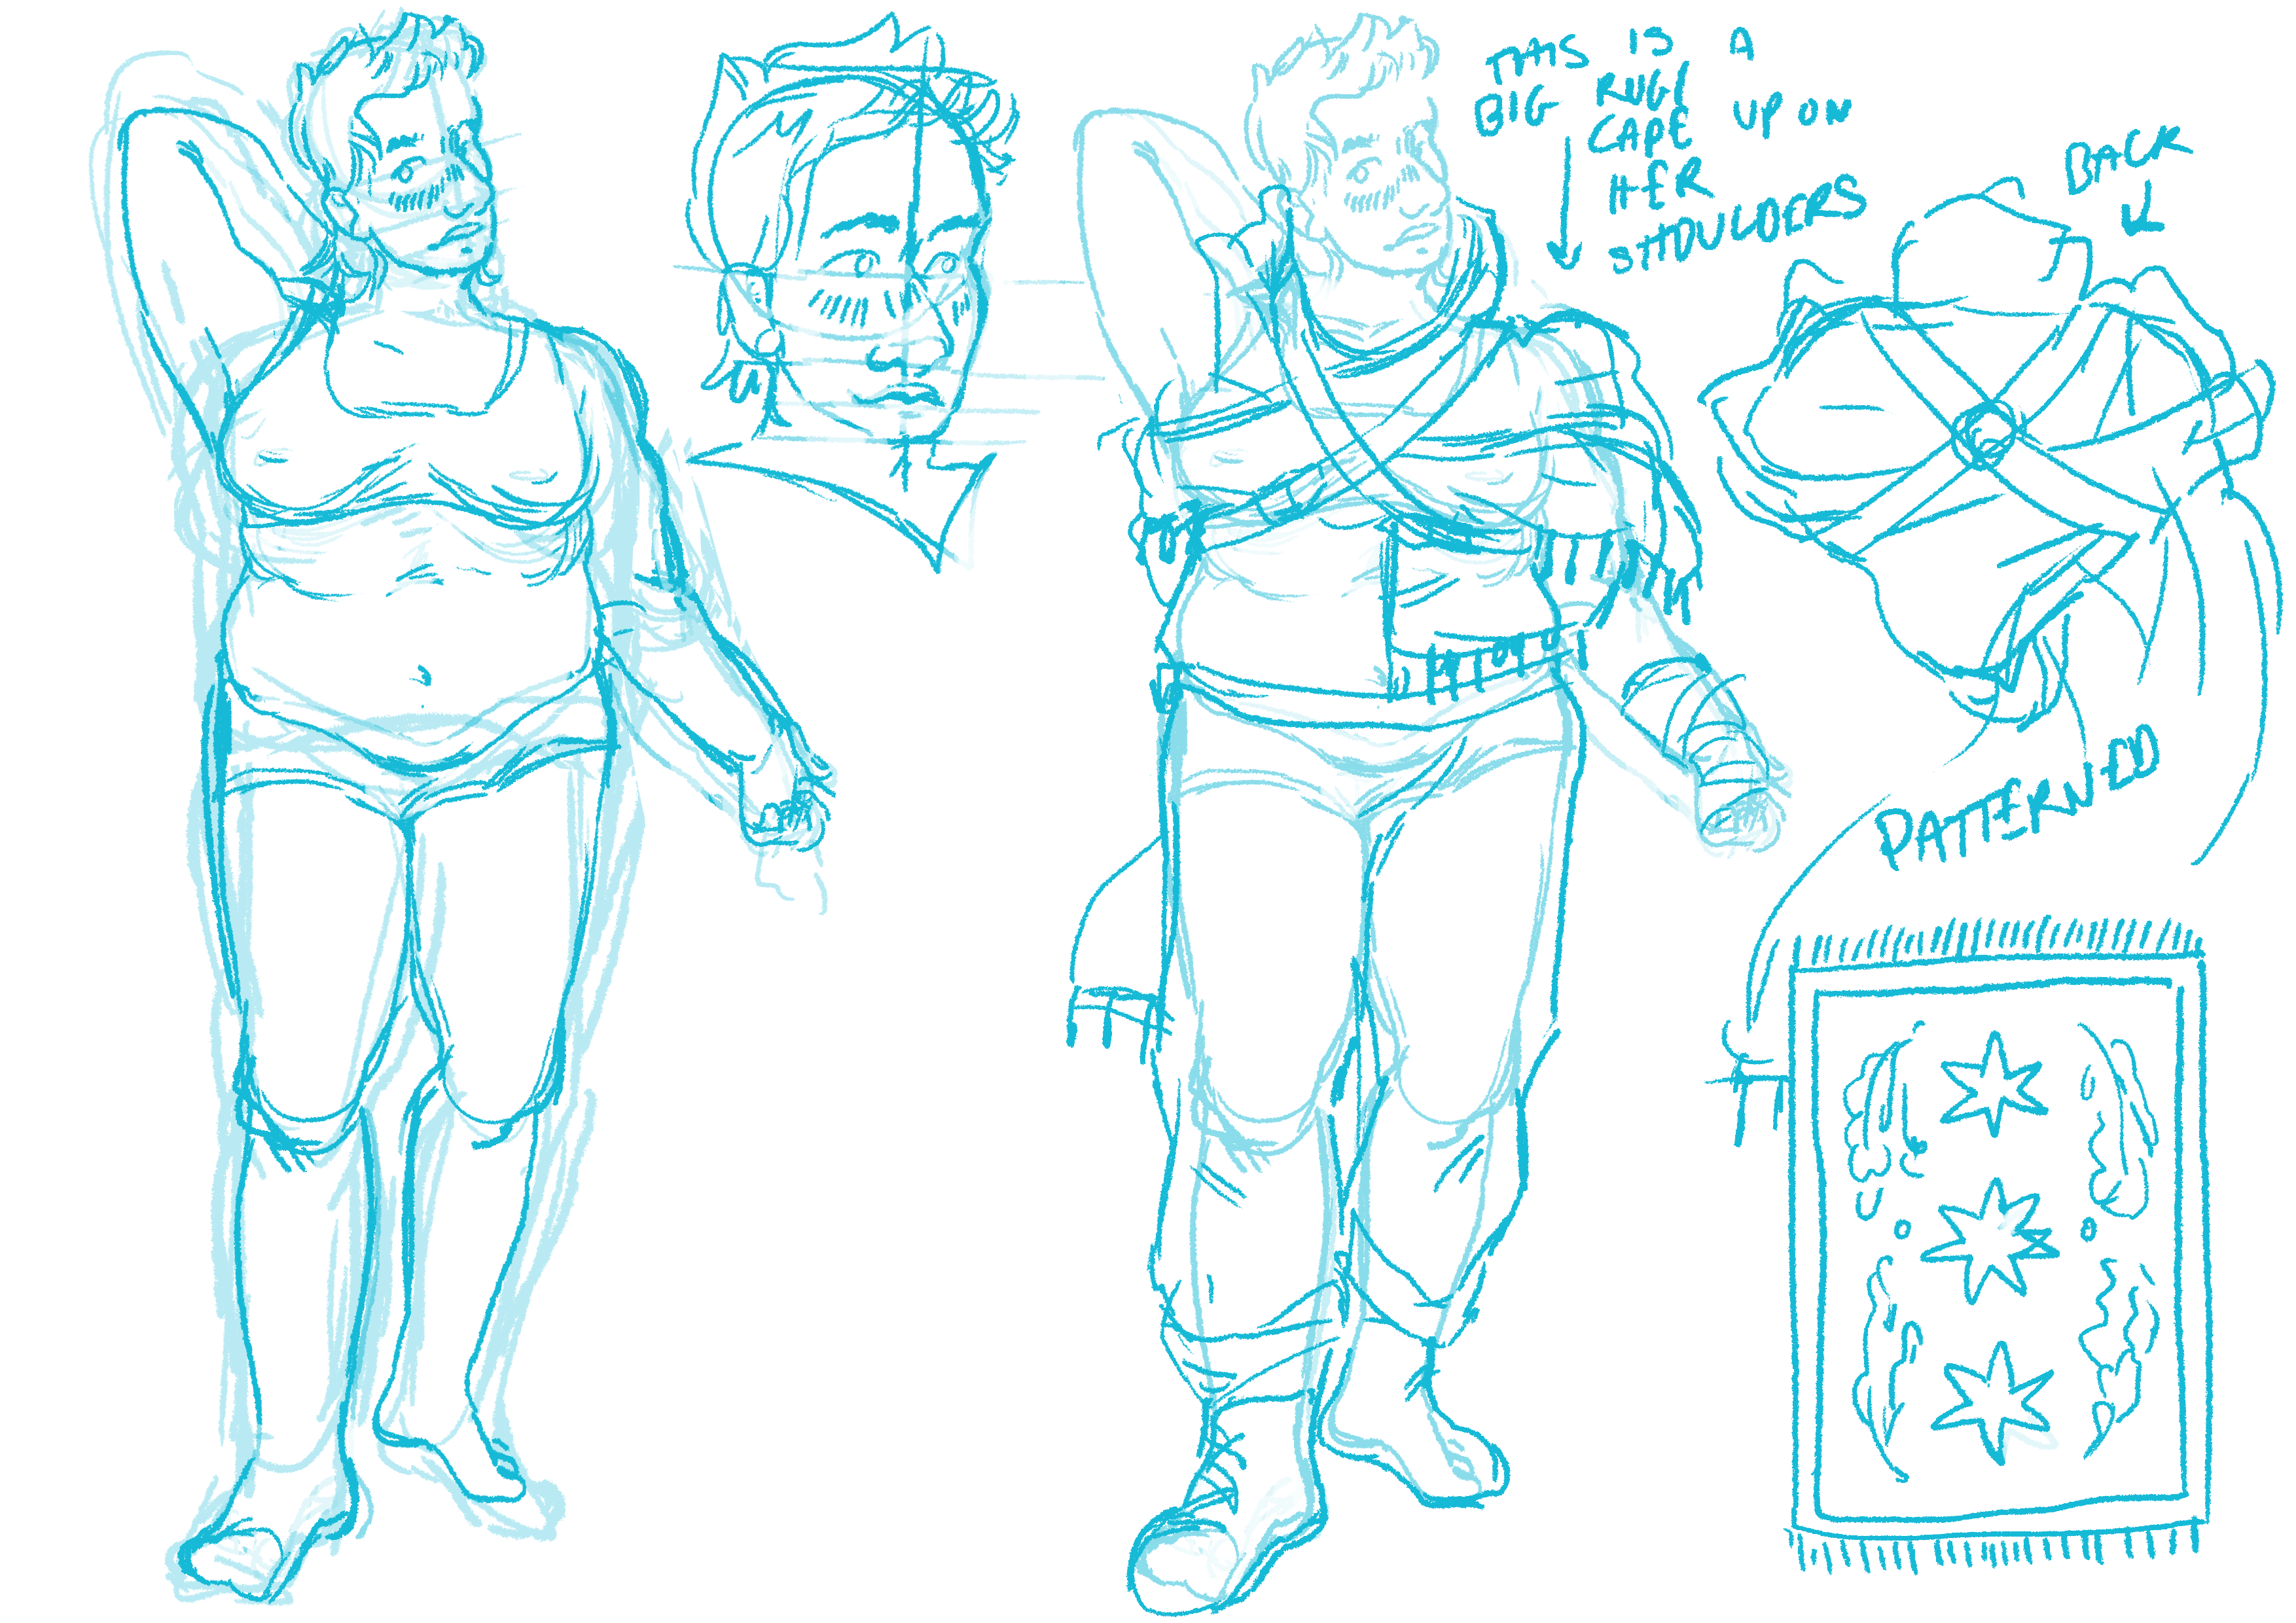 Two full-body sketches of Safiyyah, a young Brown woman with short dark hair, and a muscular, fat body. In the first sketch she's in her underwear, and in the second sketch she's in work clothes with a shawl wrapped around her shoulders and secured by belts. There's also a small bust sketch and sketches breaking down how the shawl works.